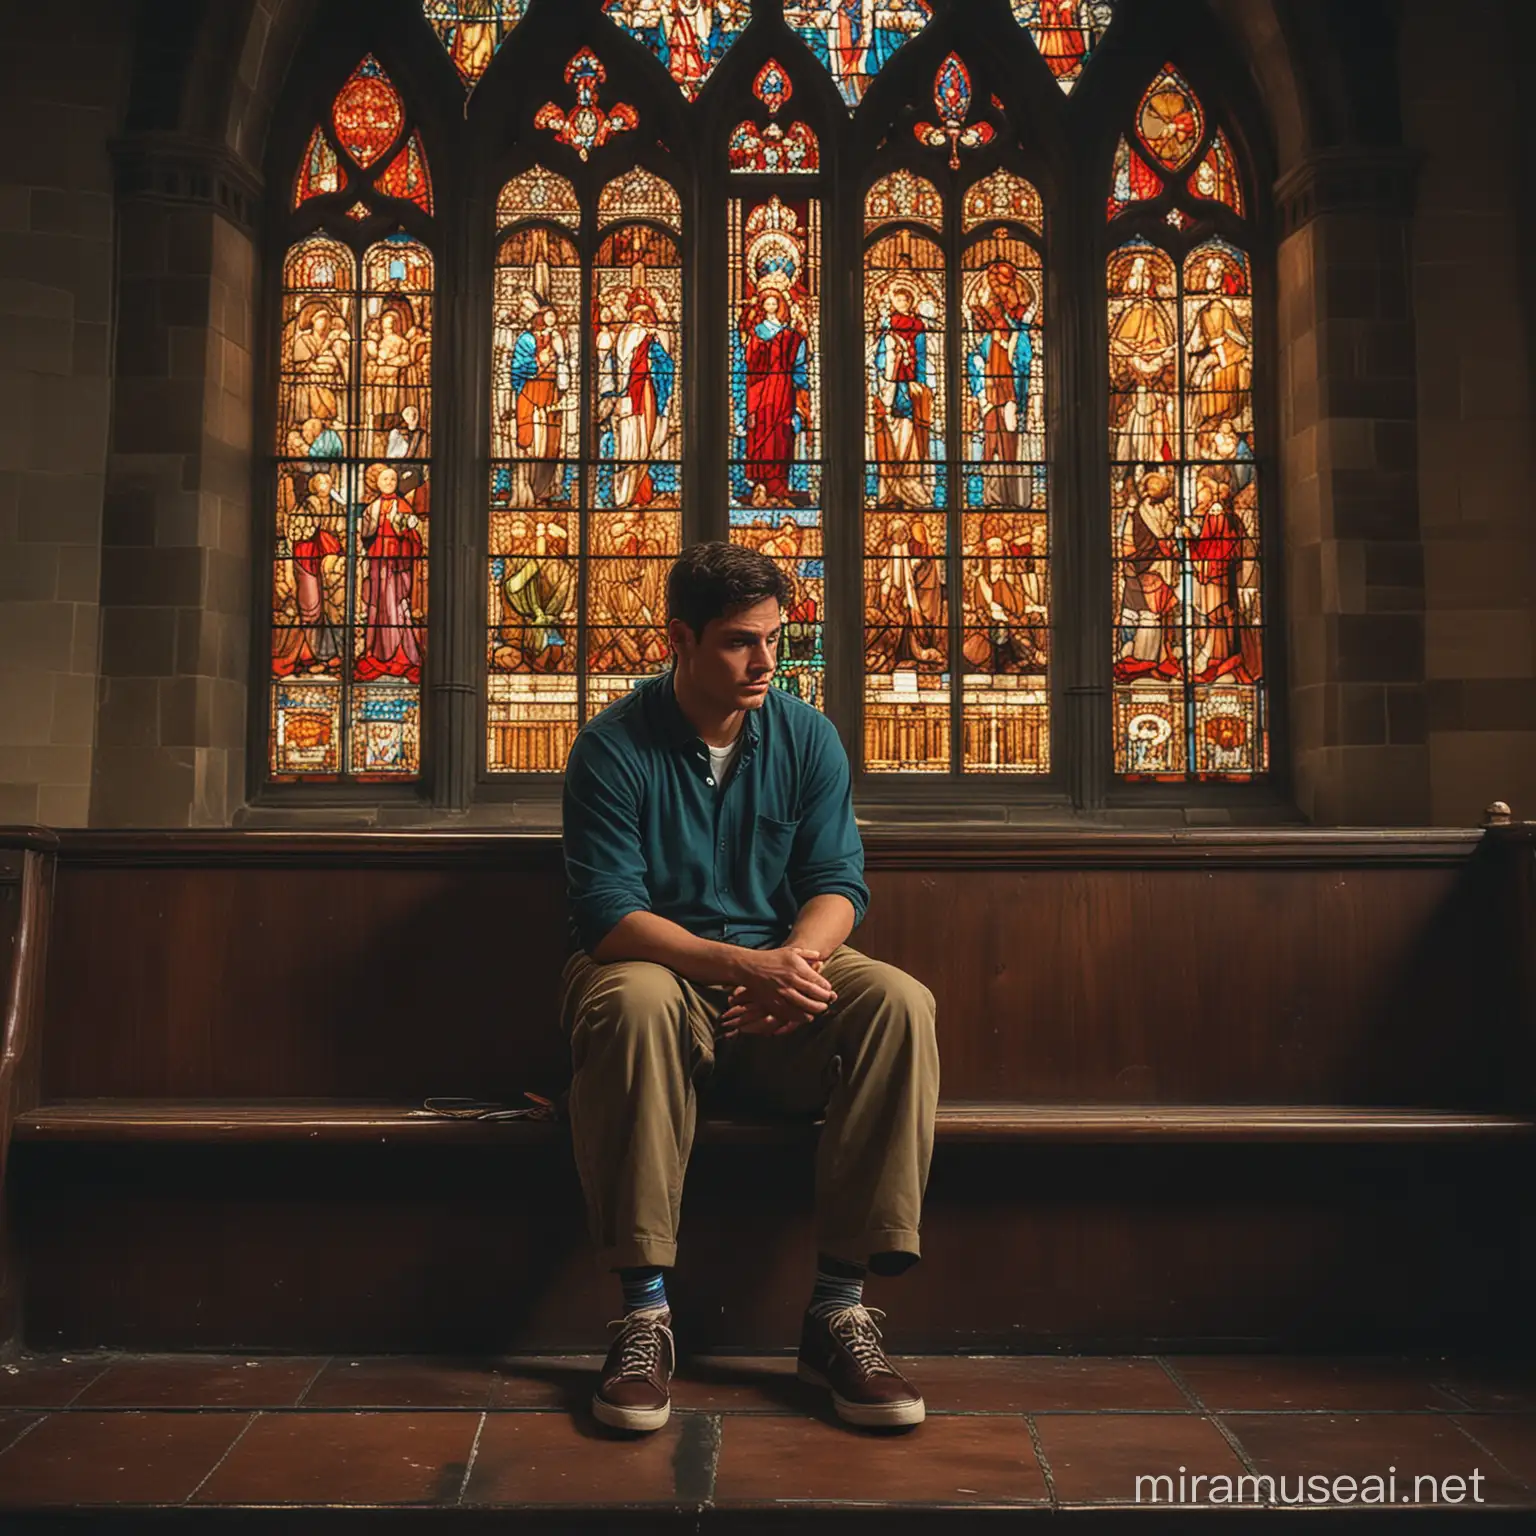 Solitary Man in a Dimly Lit Church Library with Colorful Stained Glass